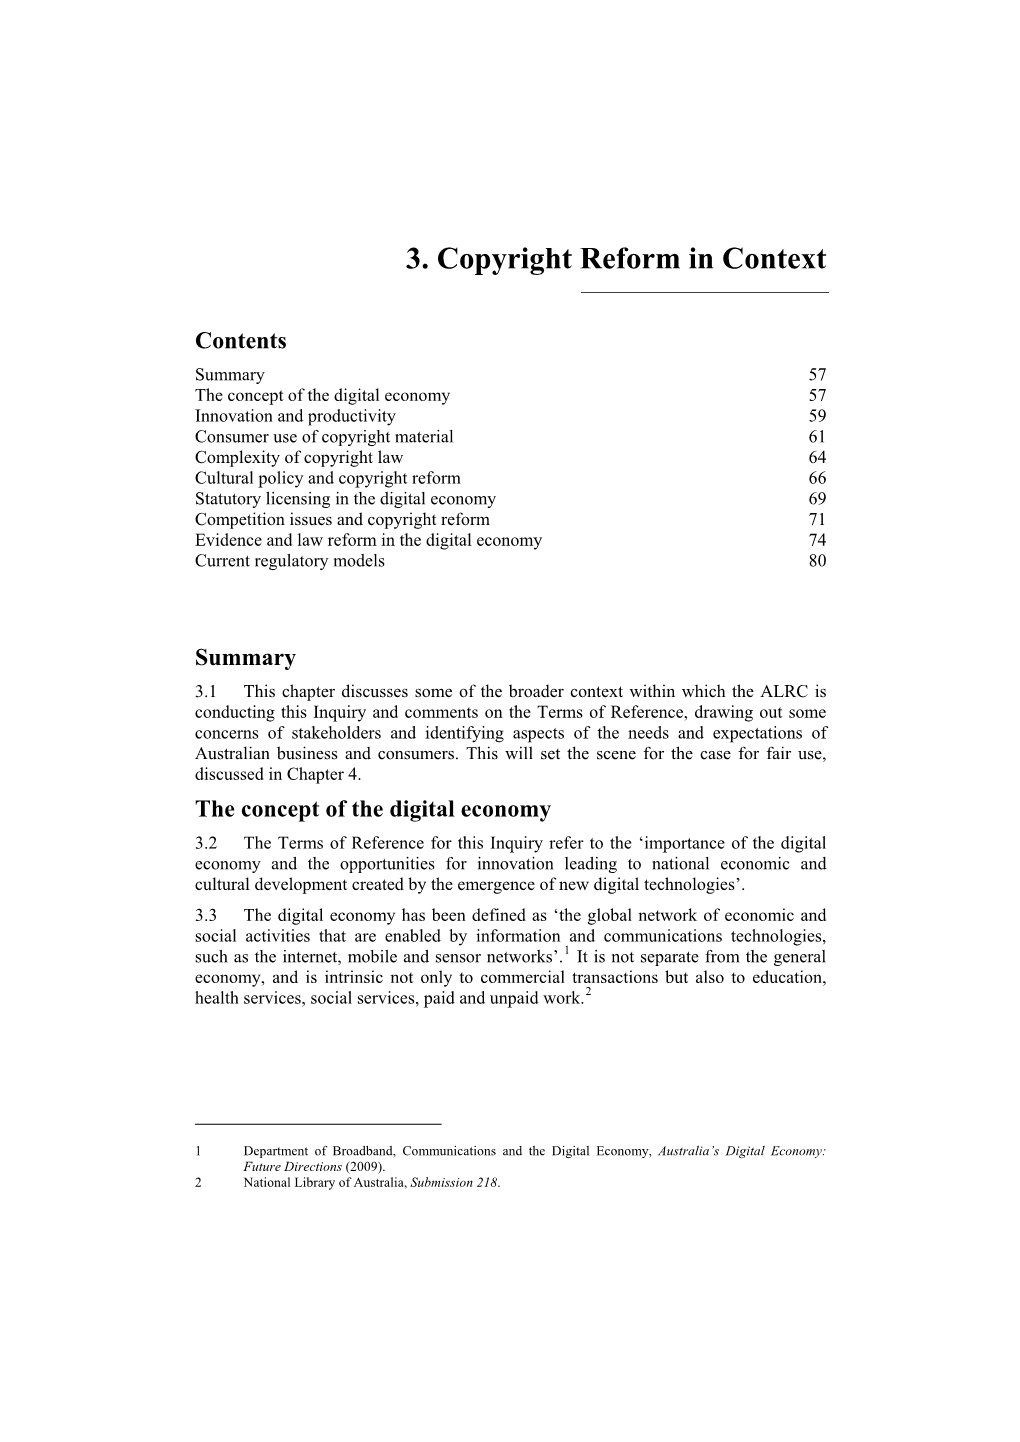 3. Copyright Reform in Context